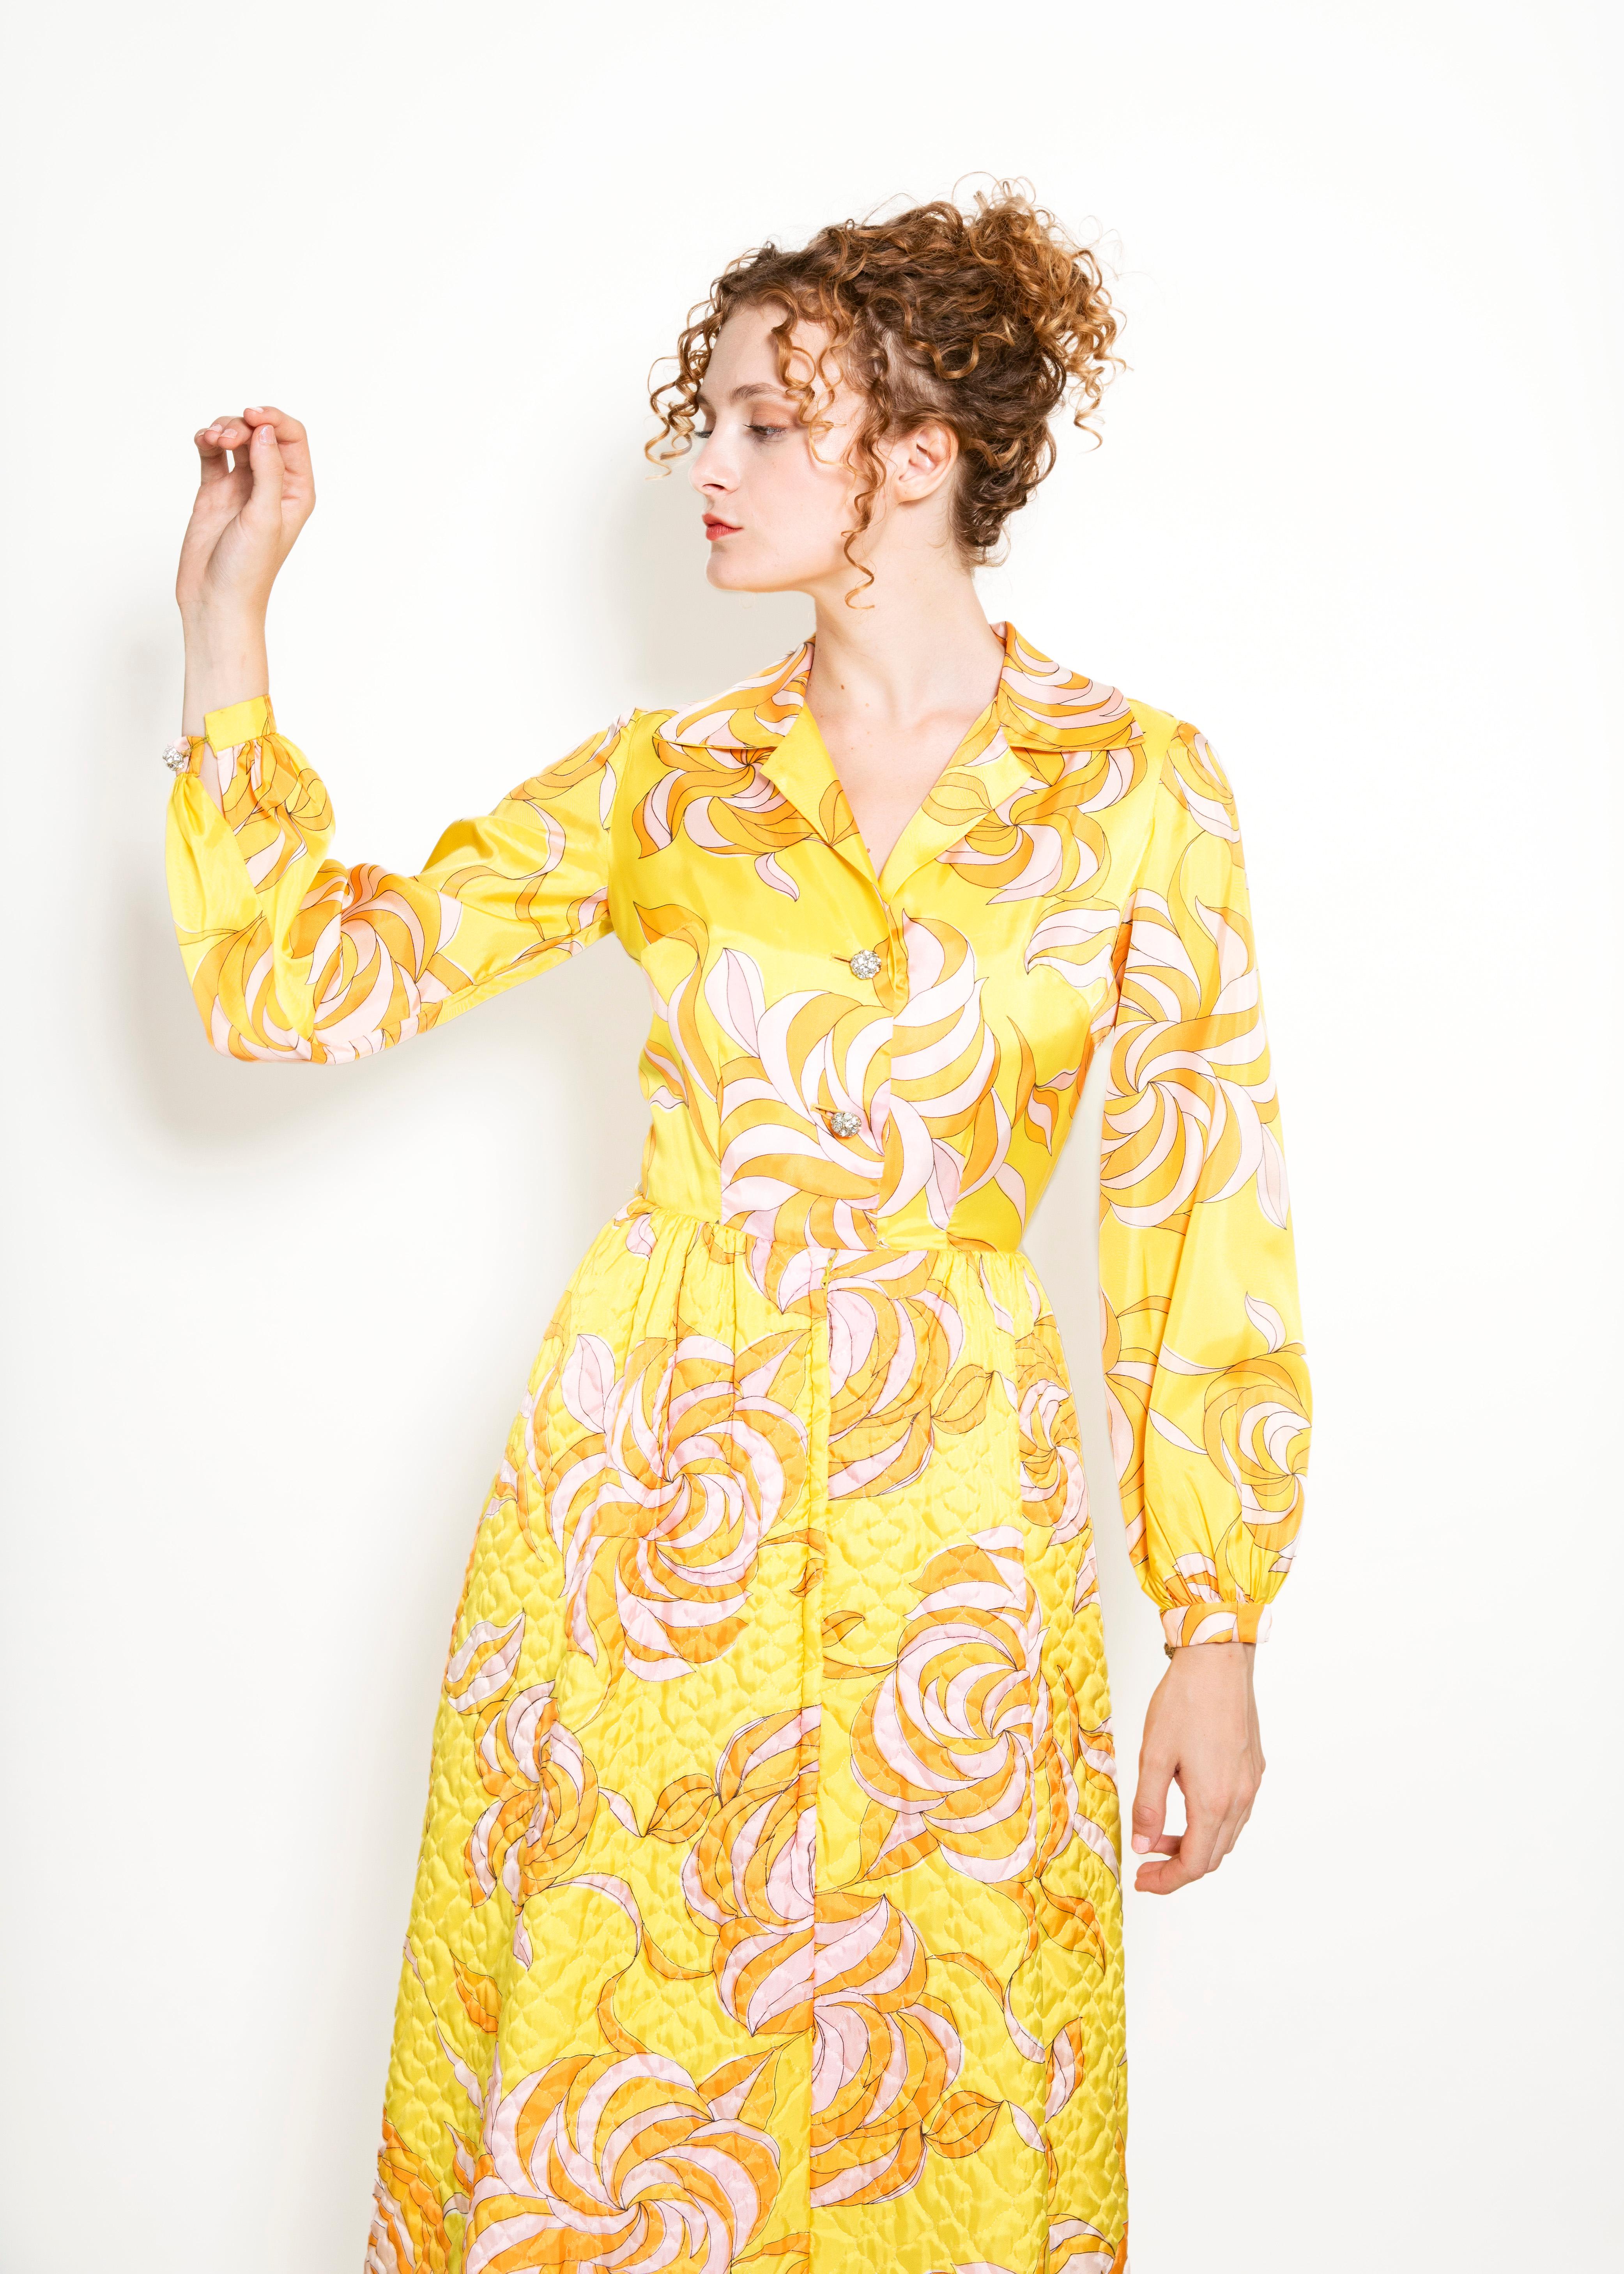 Make an impressive entrance with this vintage Saks Fifth Ave dress! Featuring a unique quilted pattern, shimmery rhinestone buttons, and a vibrant yellow-orange-pink floral print, it's like stepping out of a time machine in the most fashionable way